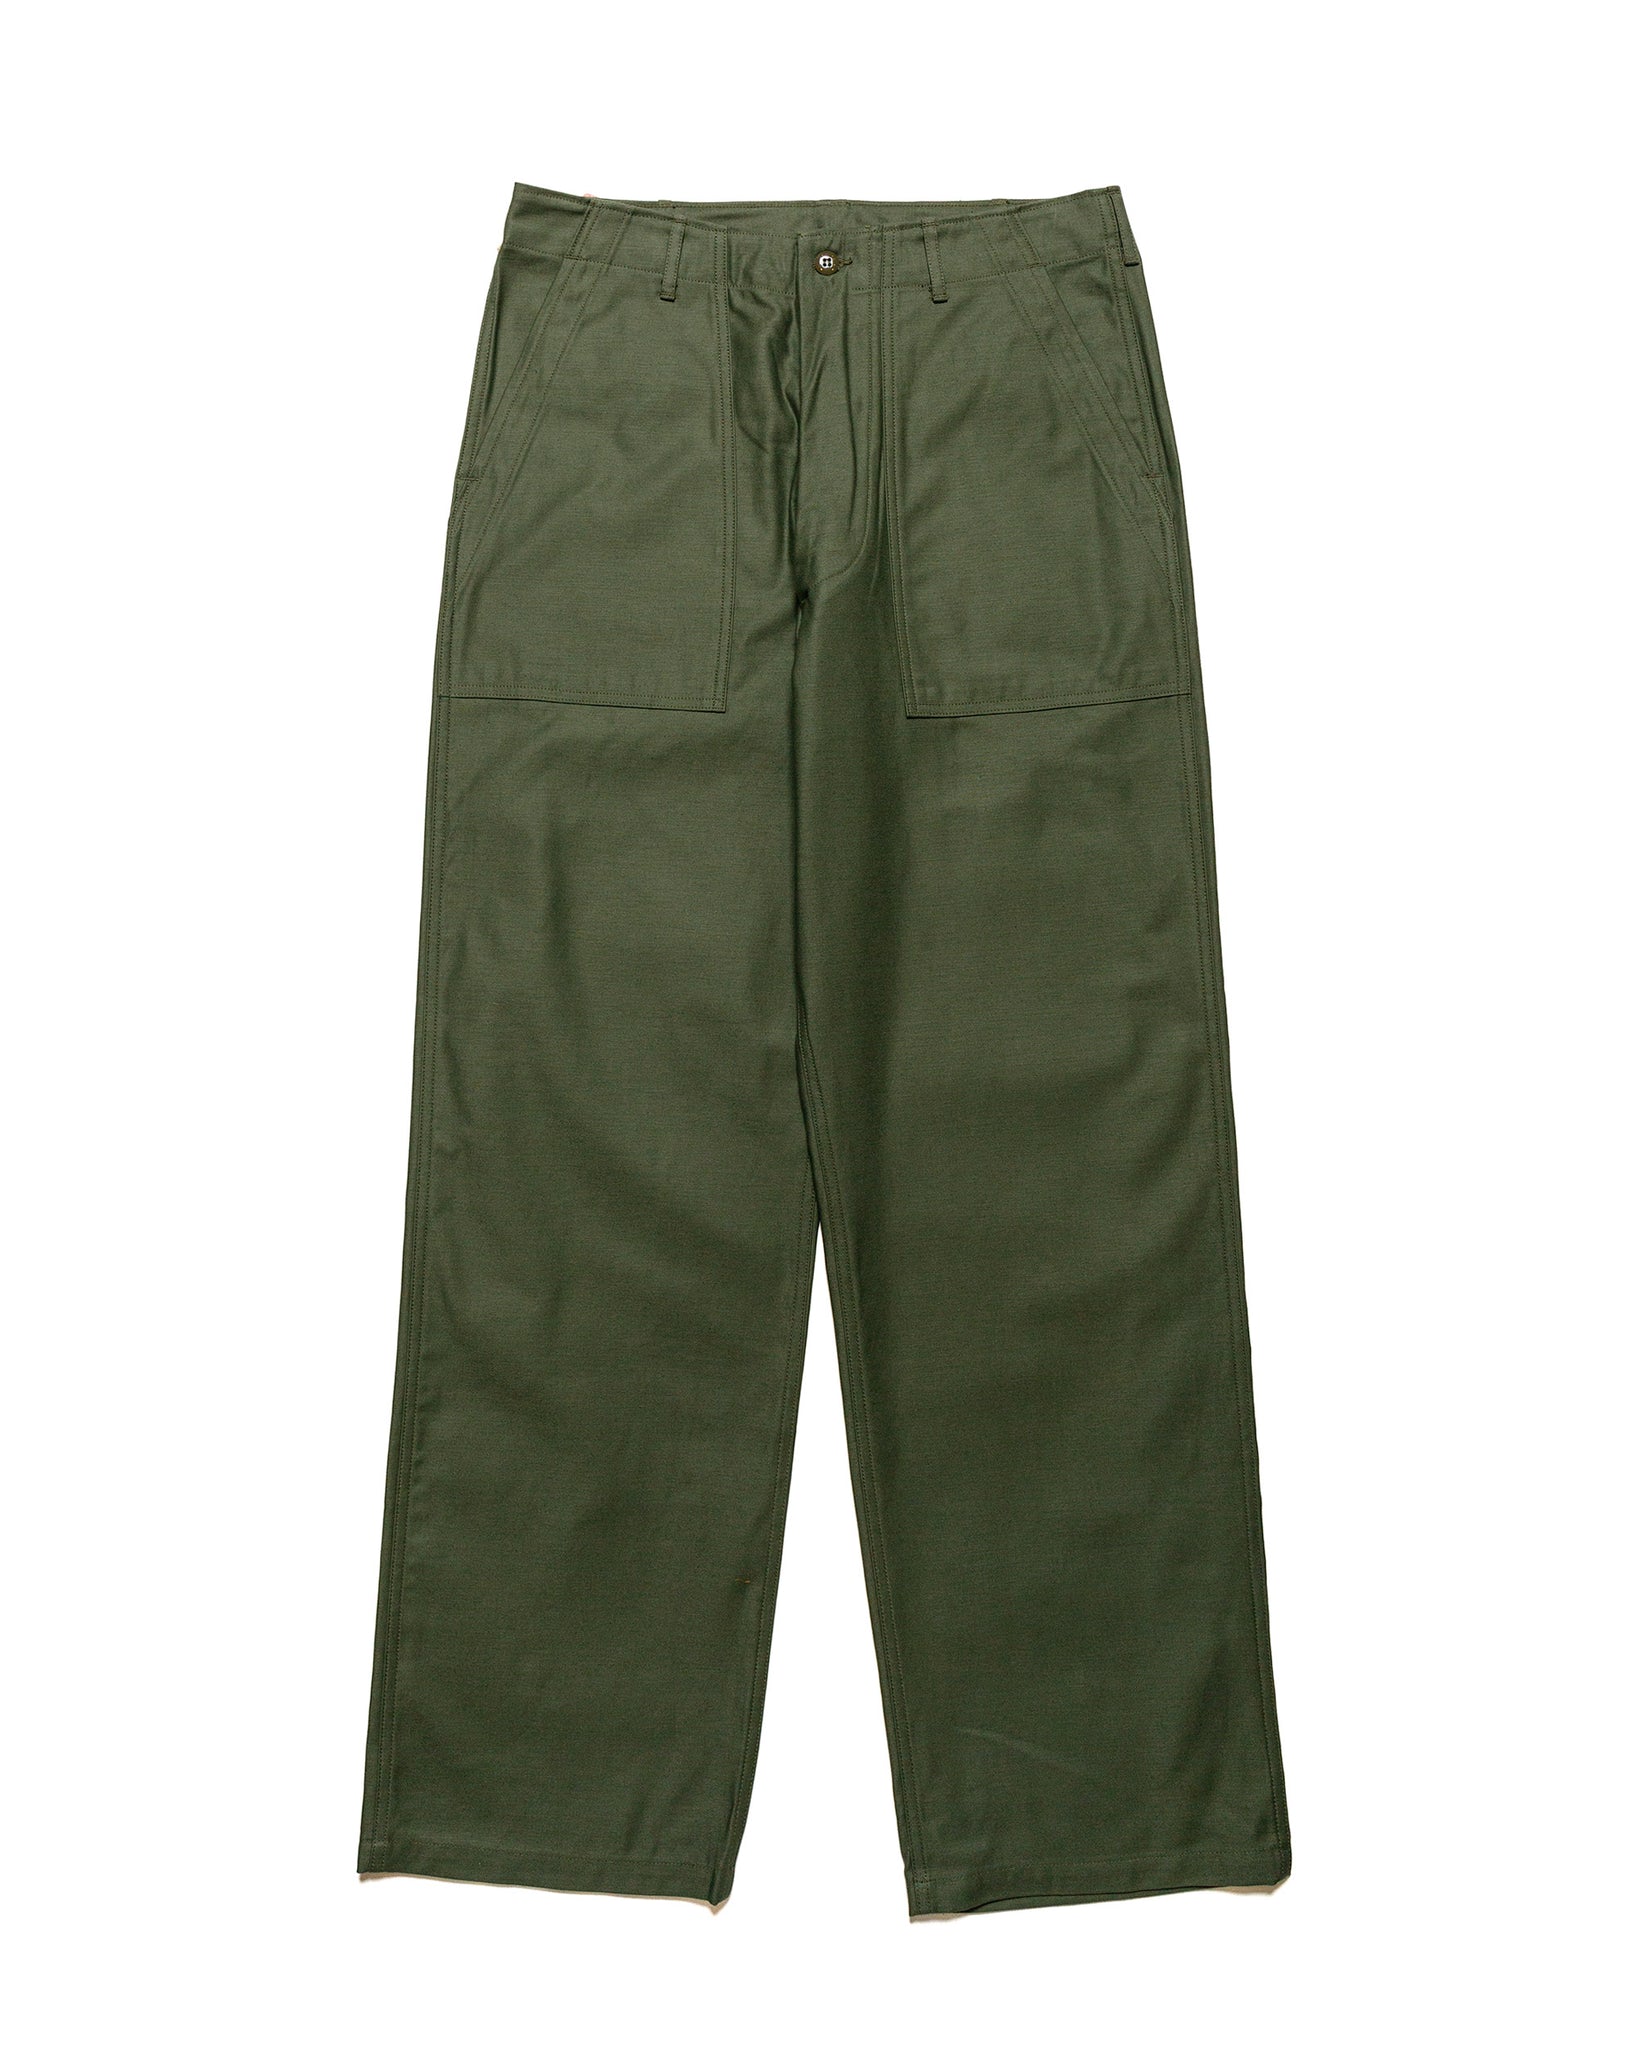 The Real McCoy's MP23003 Trousers, Men's, Cotton Sateen, OG-107 Olive